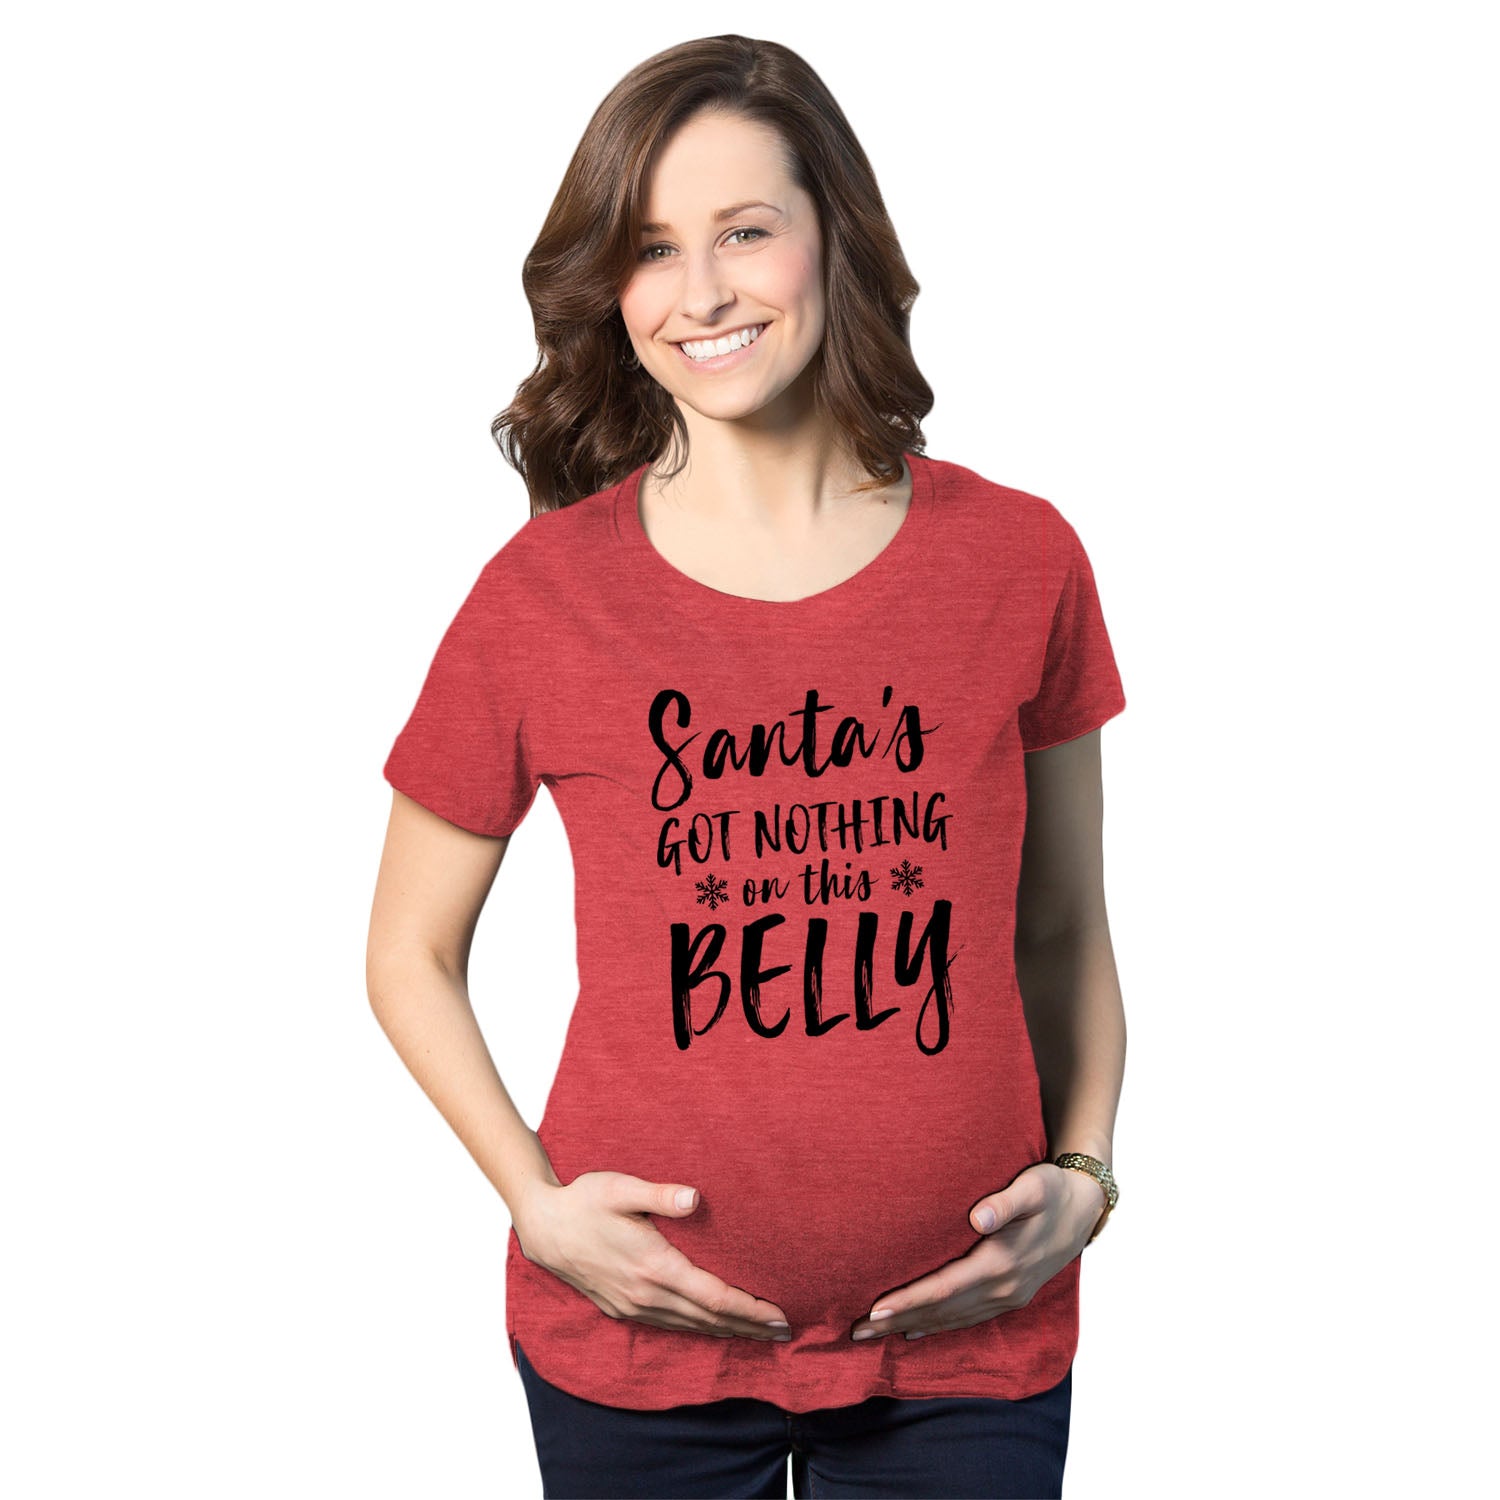 Funny Heather Red - Sants Got Nothing Santa’s Got Nothing On This Belly Maternity T Shirt Nerdy Christmas Tee